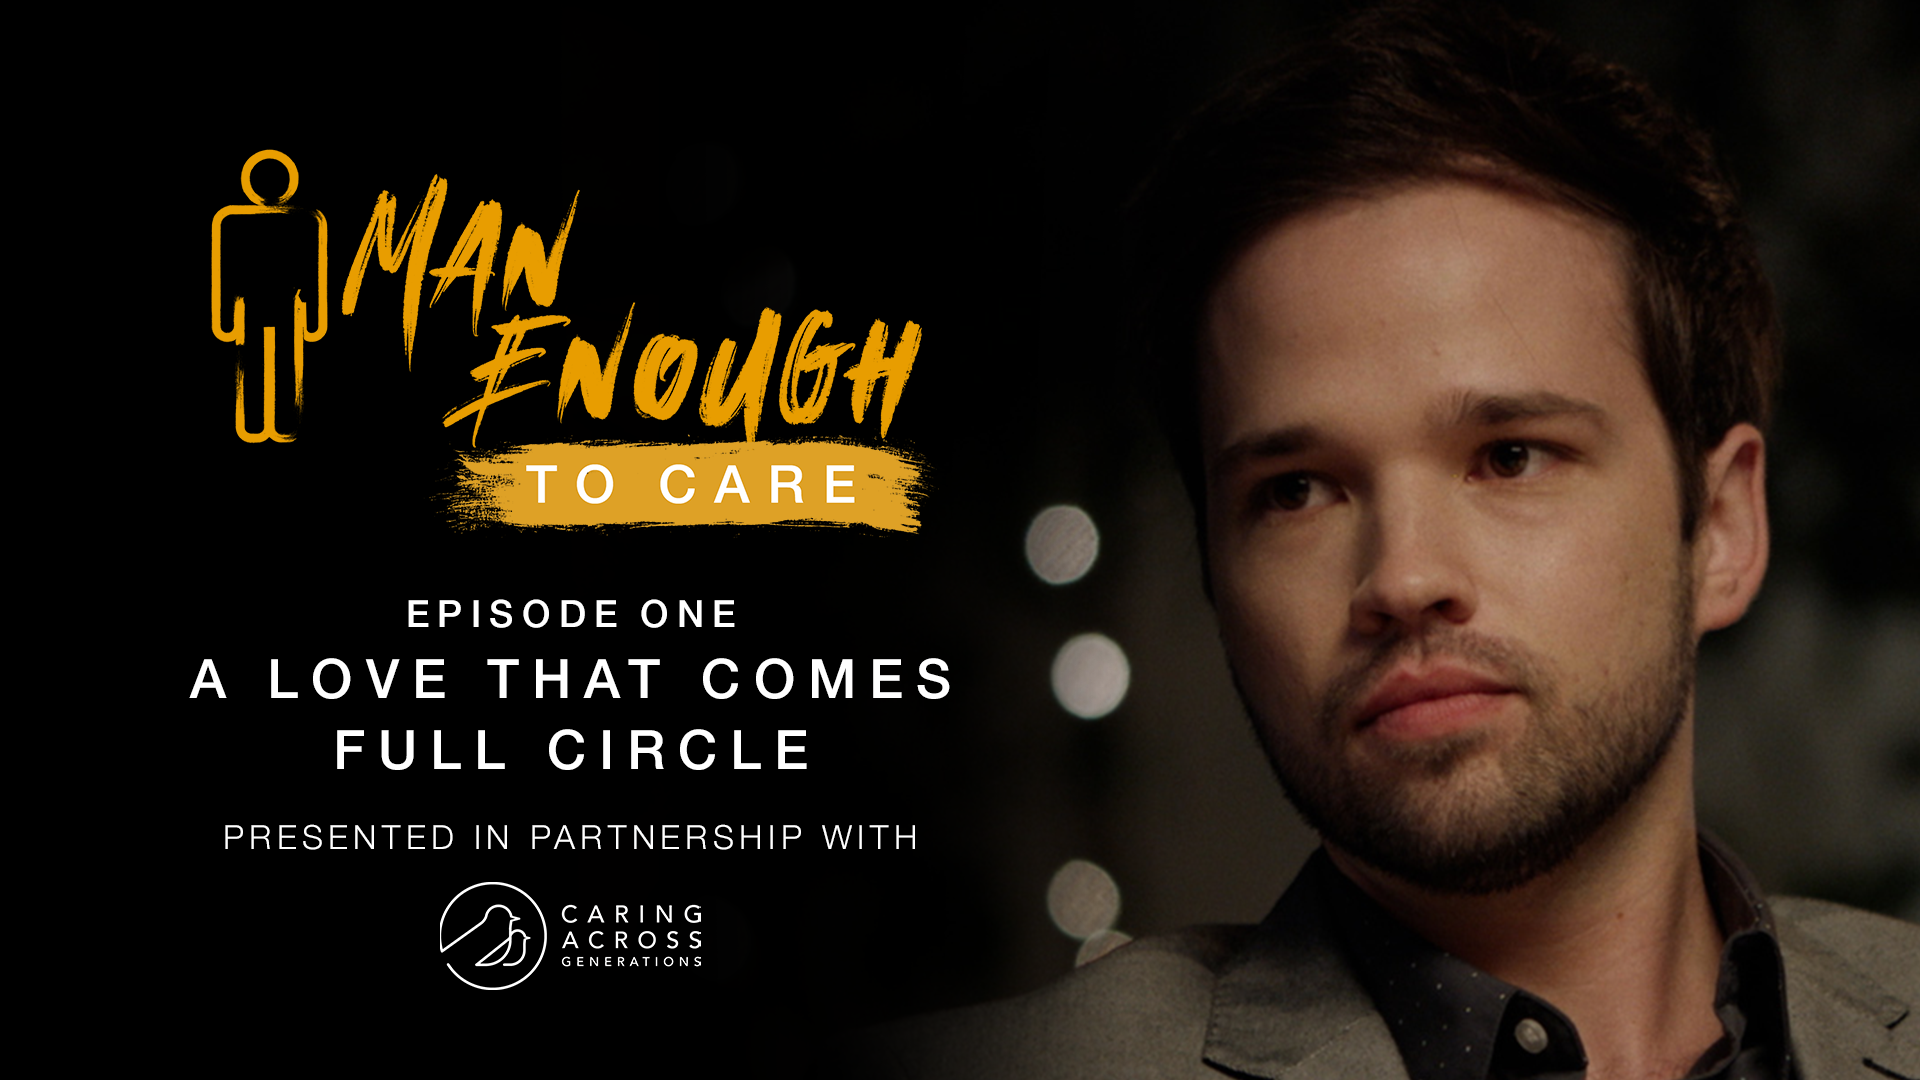 Thumbnail from Man Enough episode 1, featuring actor Nathan Kress and the title 